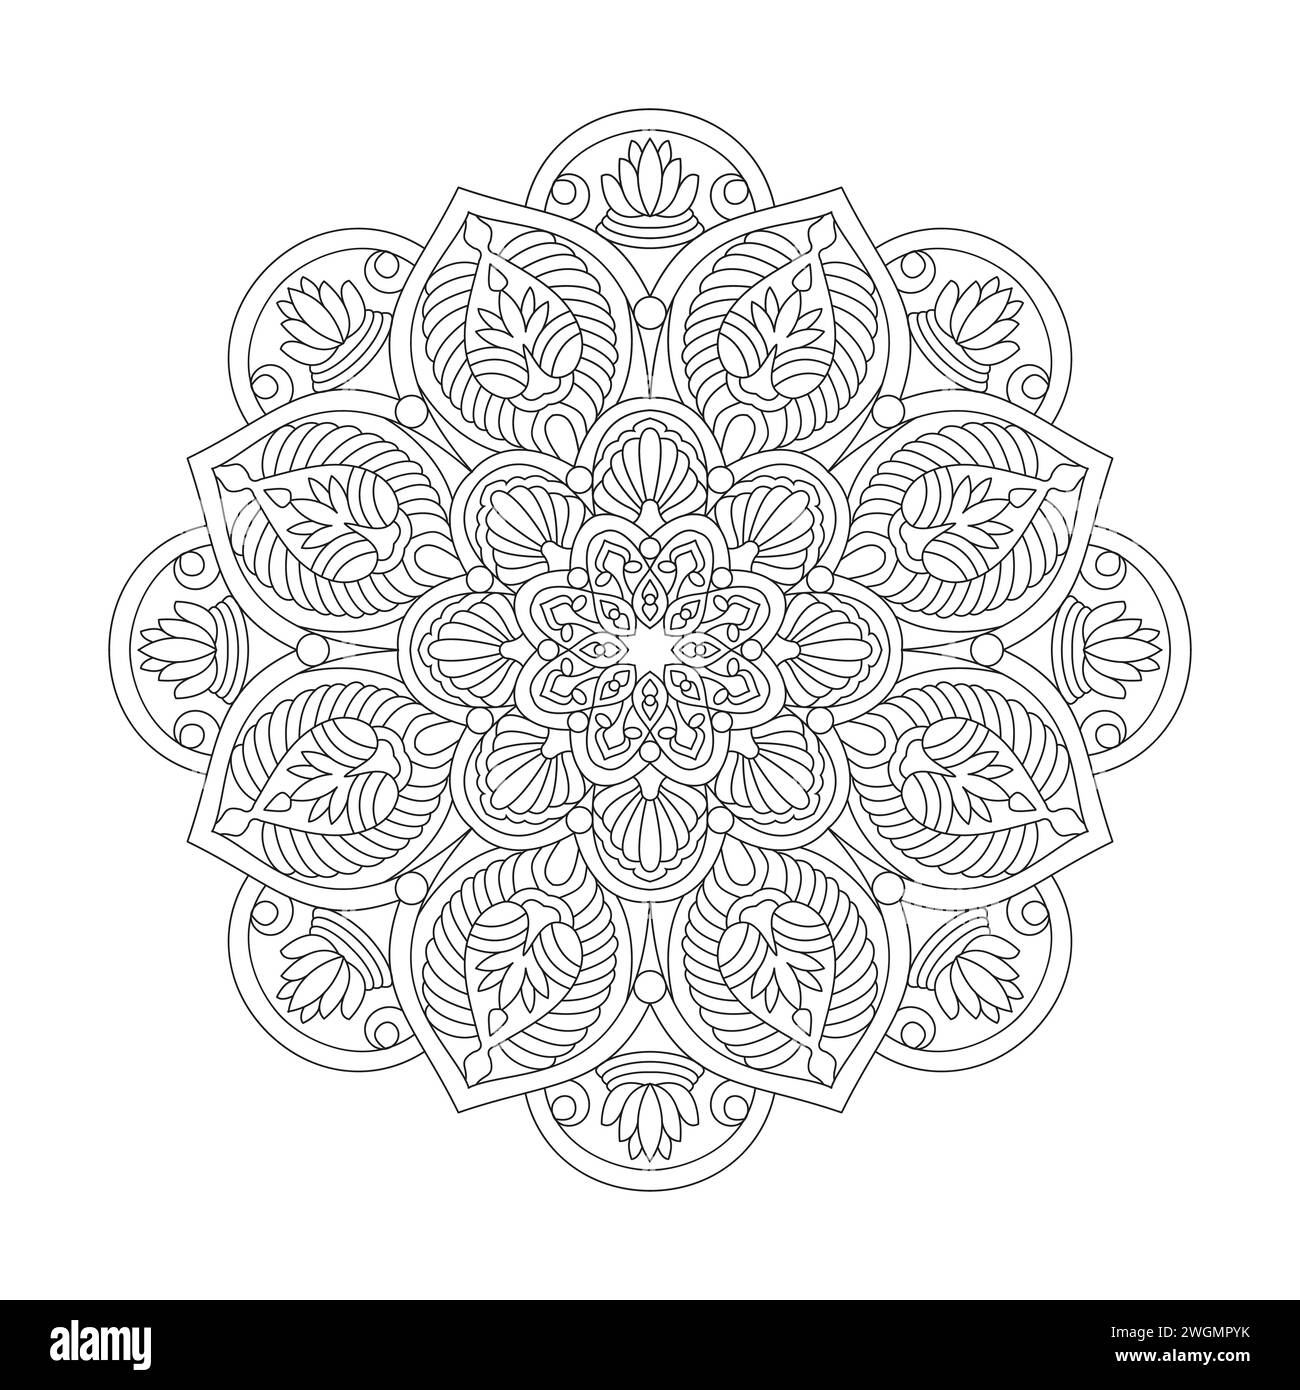 Peaceful Decorative Mandala Coloring Book Page for kdp Book Interior. Peaceful Petals, Ability to Relax, Brain Experiences, Harmonious Haven, Peaceful Stock Vector